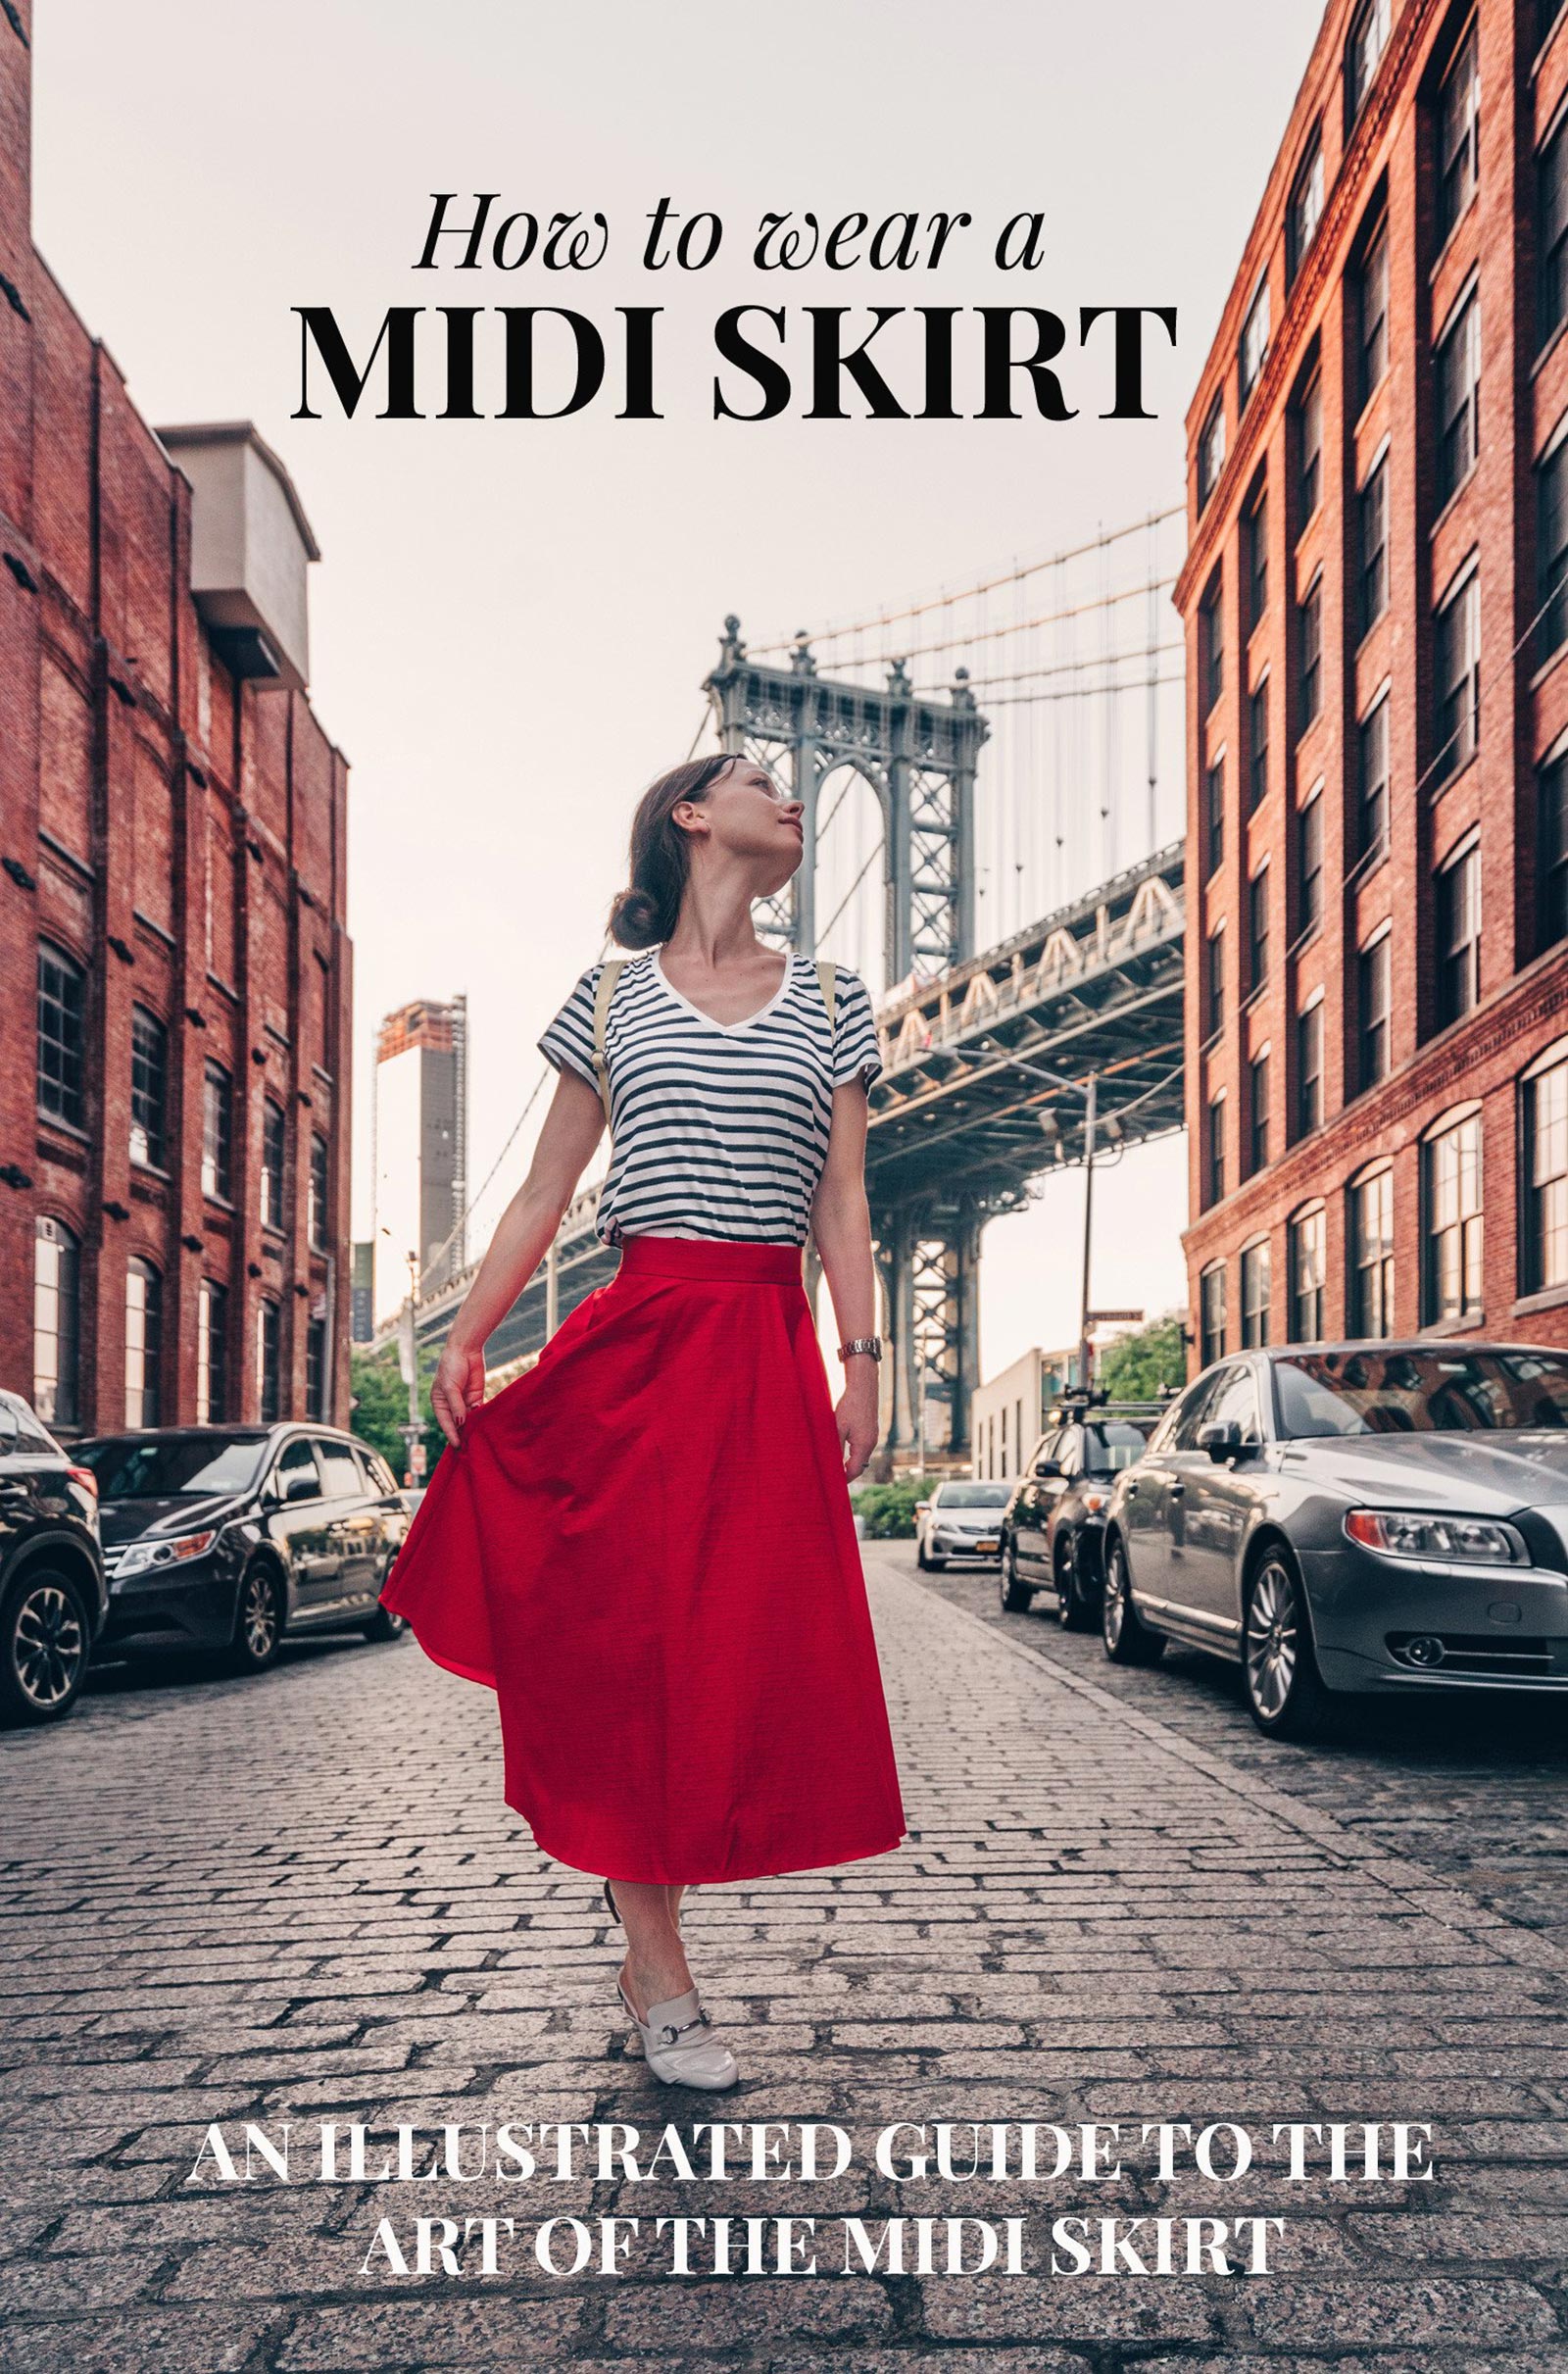 How to wear a midi skirt: styling tips